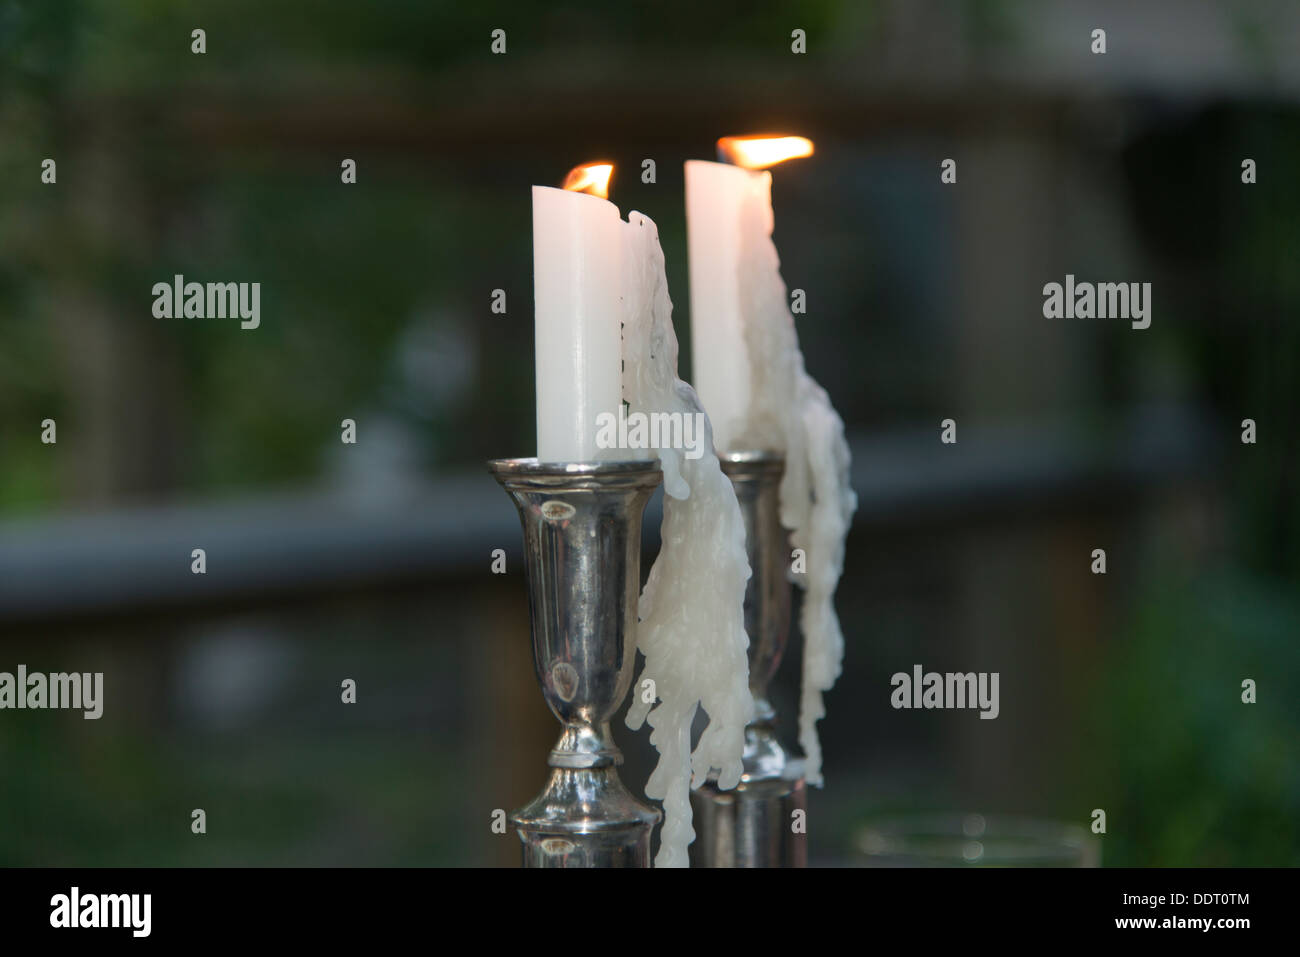 Close-up of burning candles on stand, Lake of The Woods, Keewatin, Ontario, Canada Stock Photo